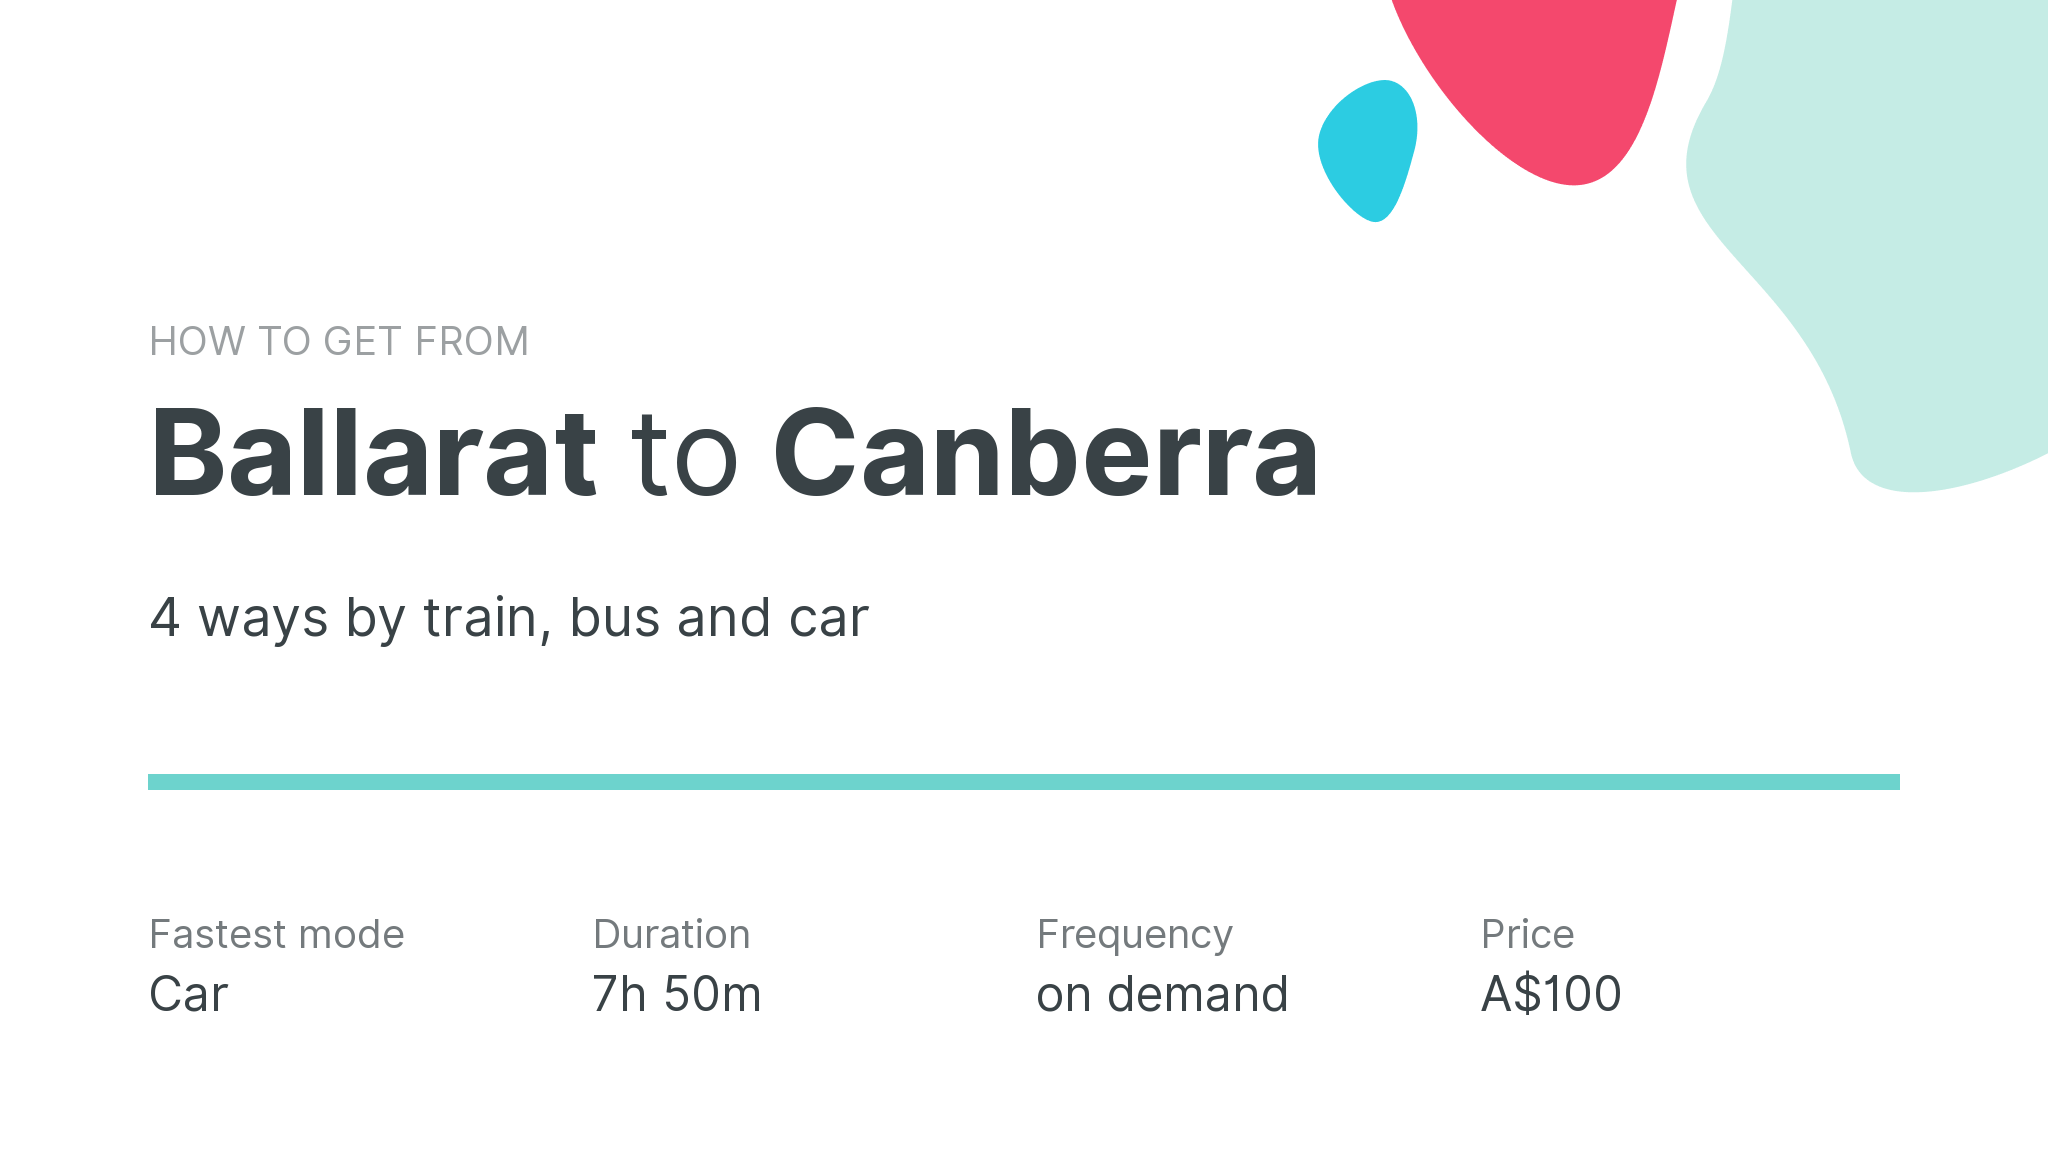 How do I get from Ballarat to Canberra